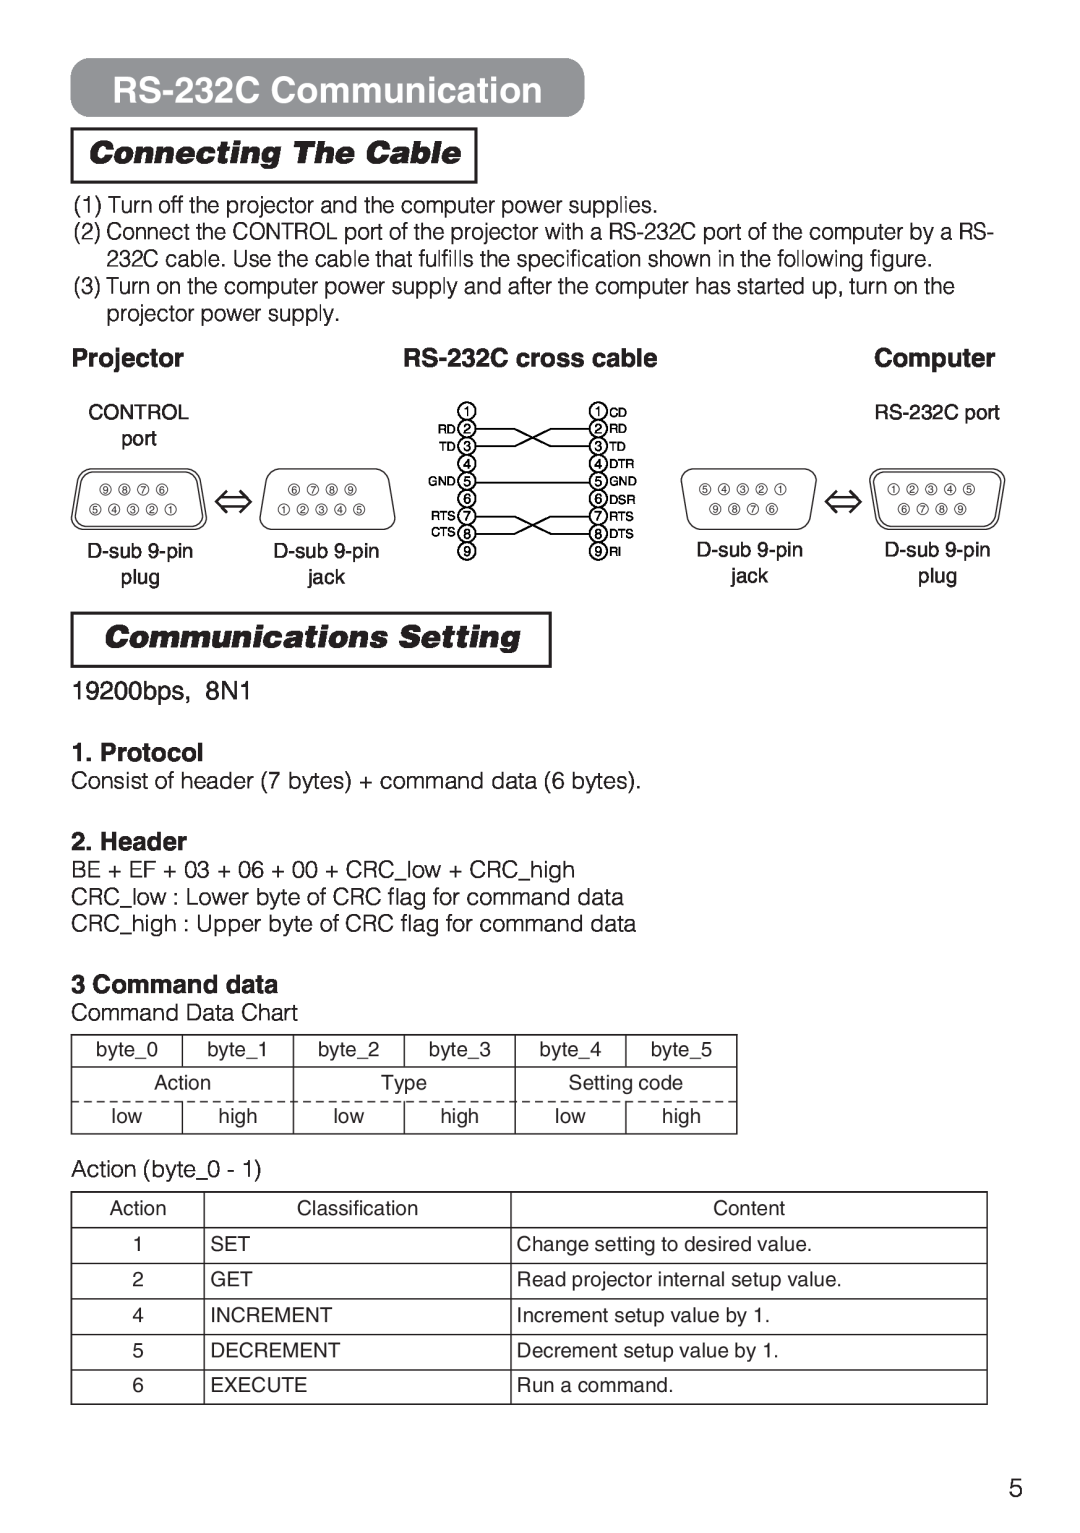 Dukane 8044 RS-232C Communication, Connecting The Cable, Communications Setting, RS-232C cross cable, Computer, Protocol 